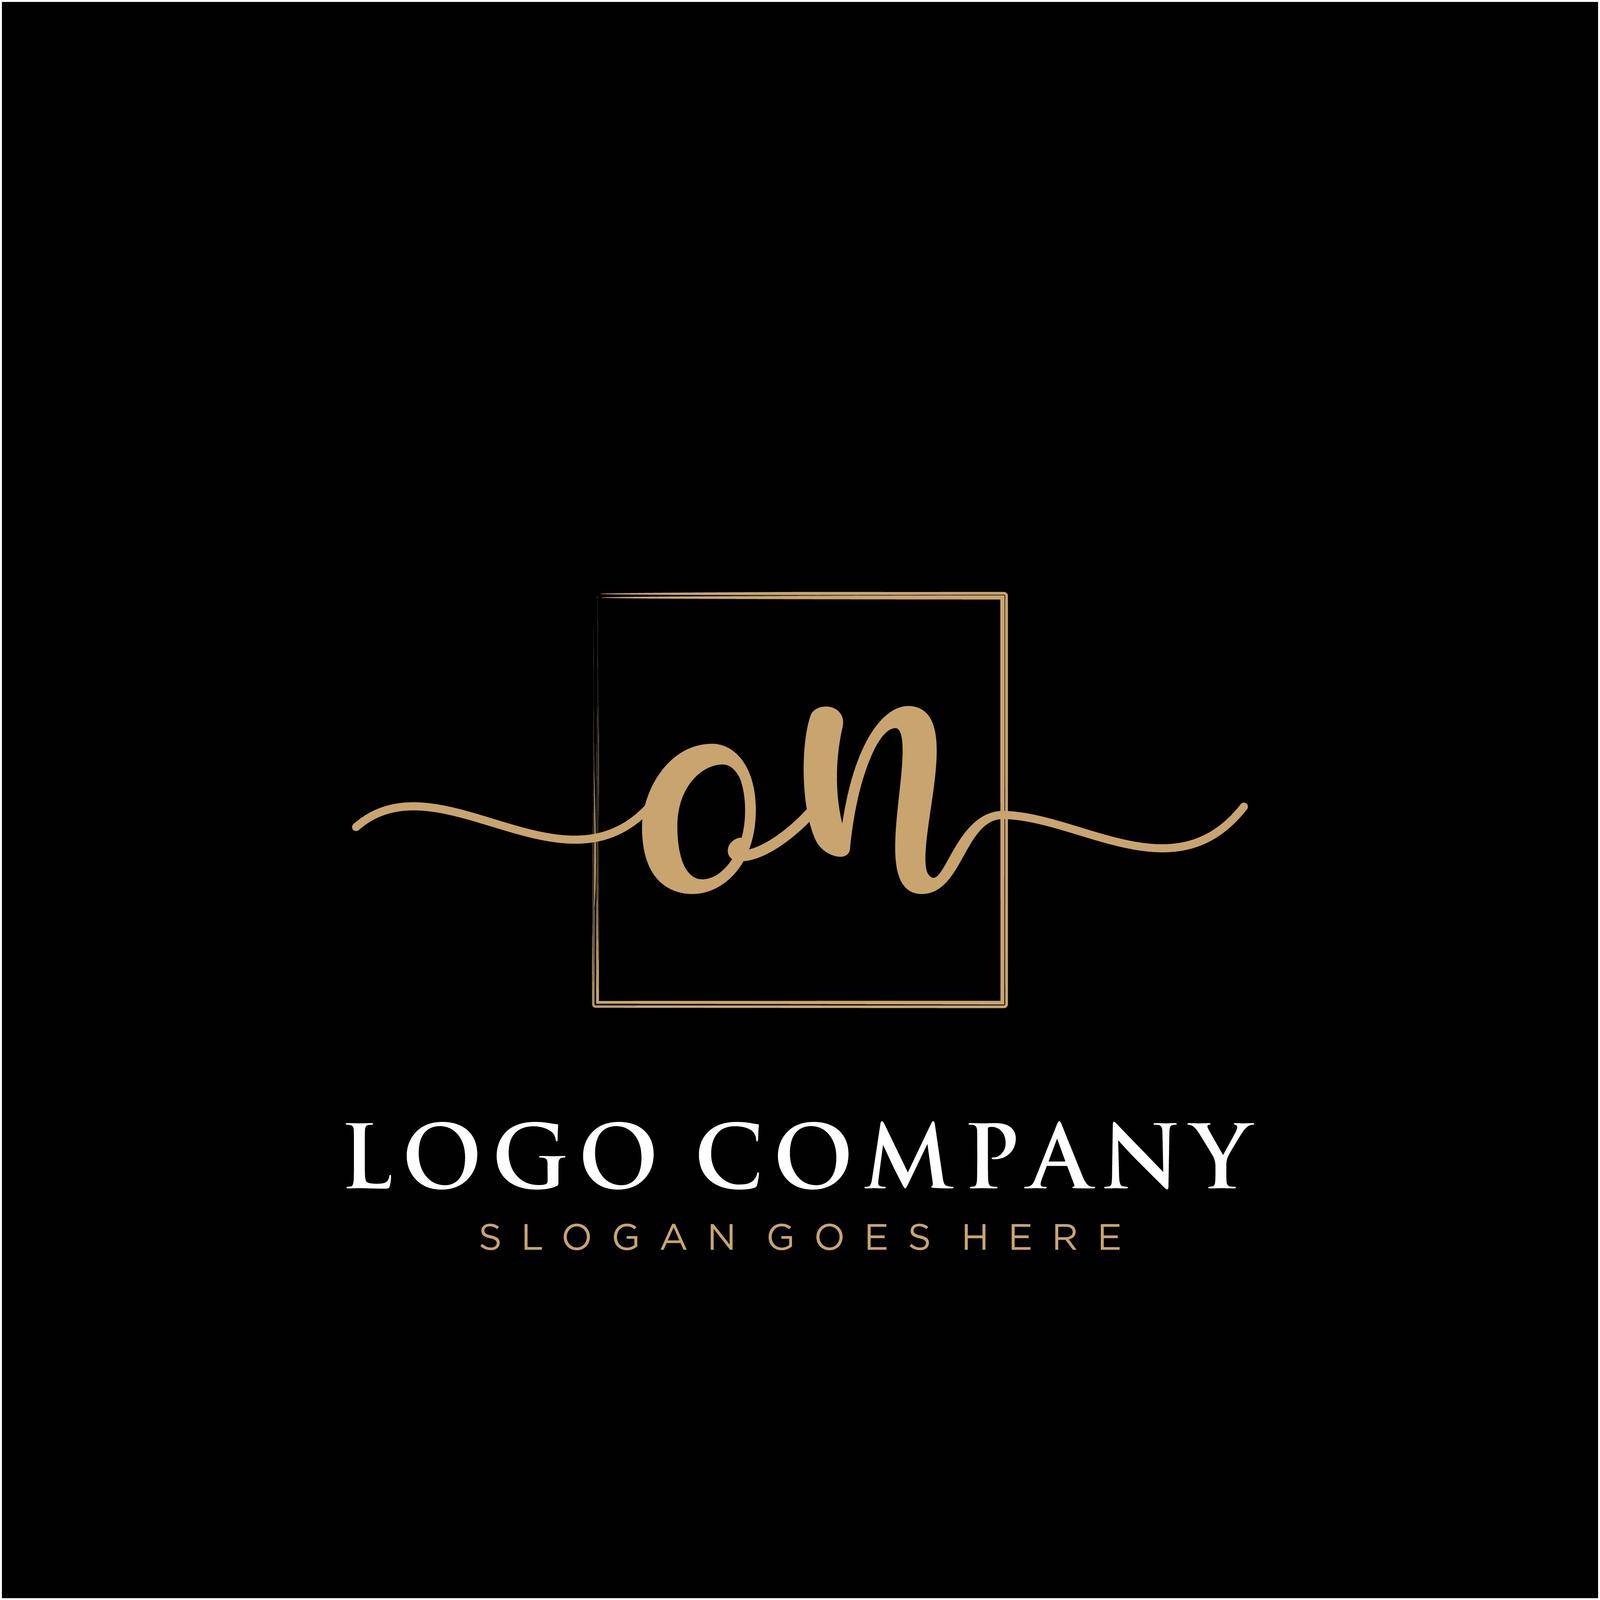 ON Initial handwriting logo with rectangle template vector by liaanniesatul